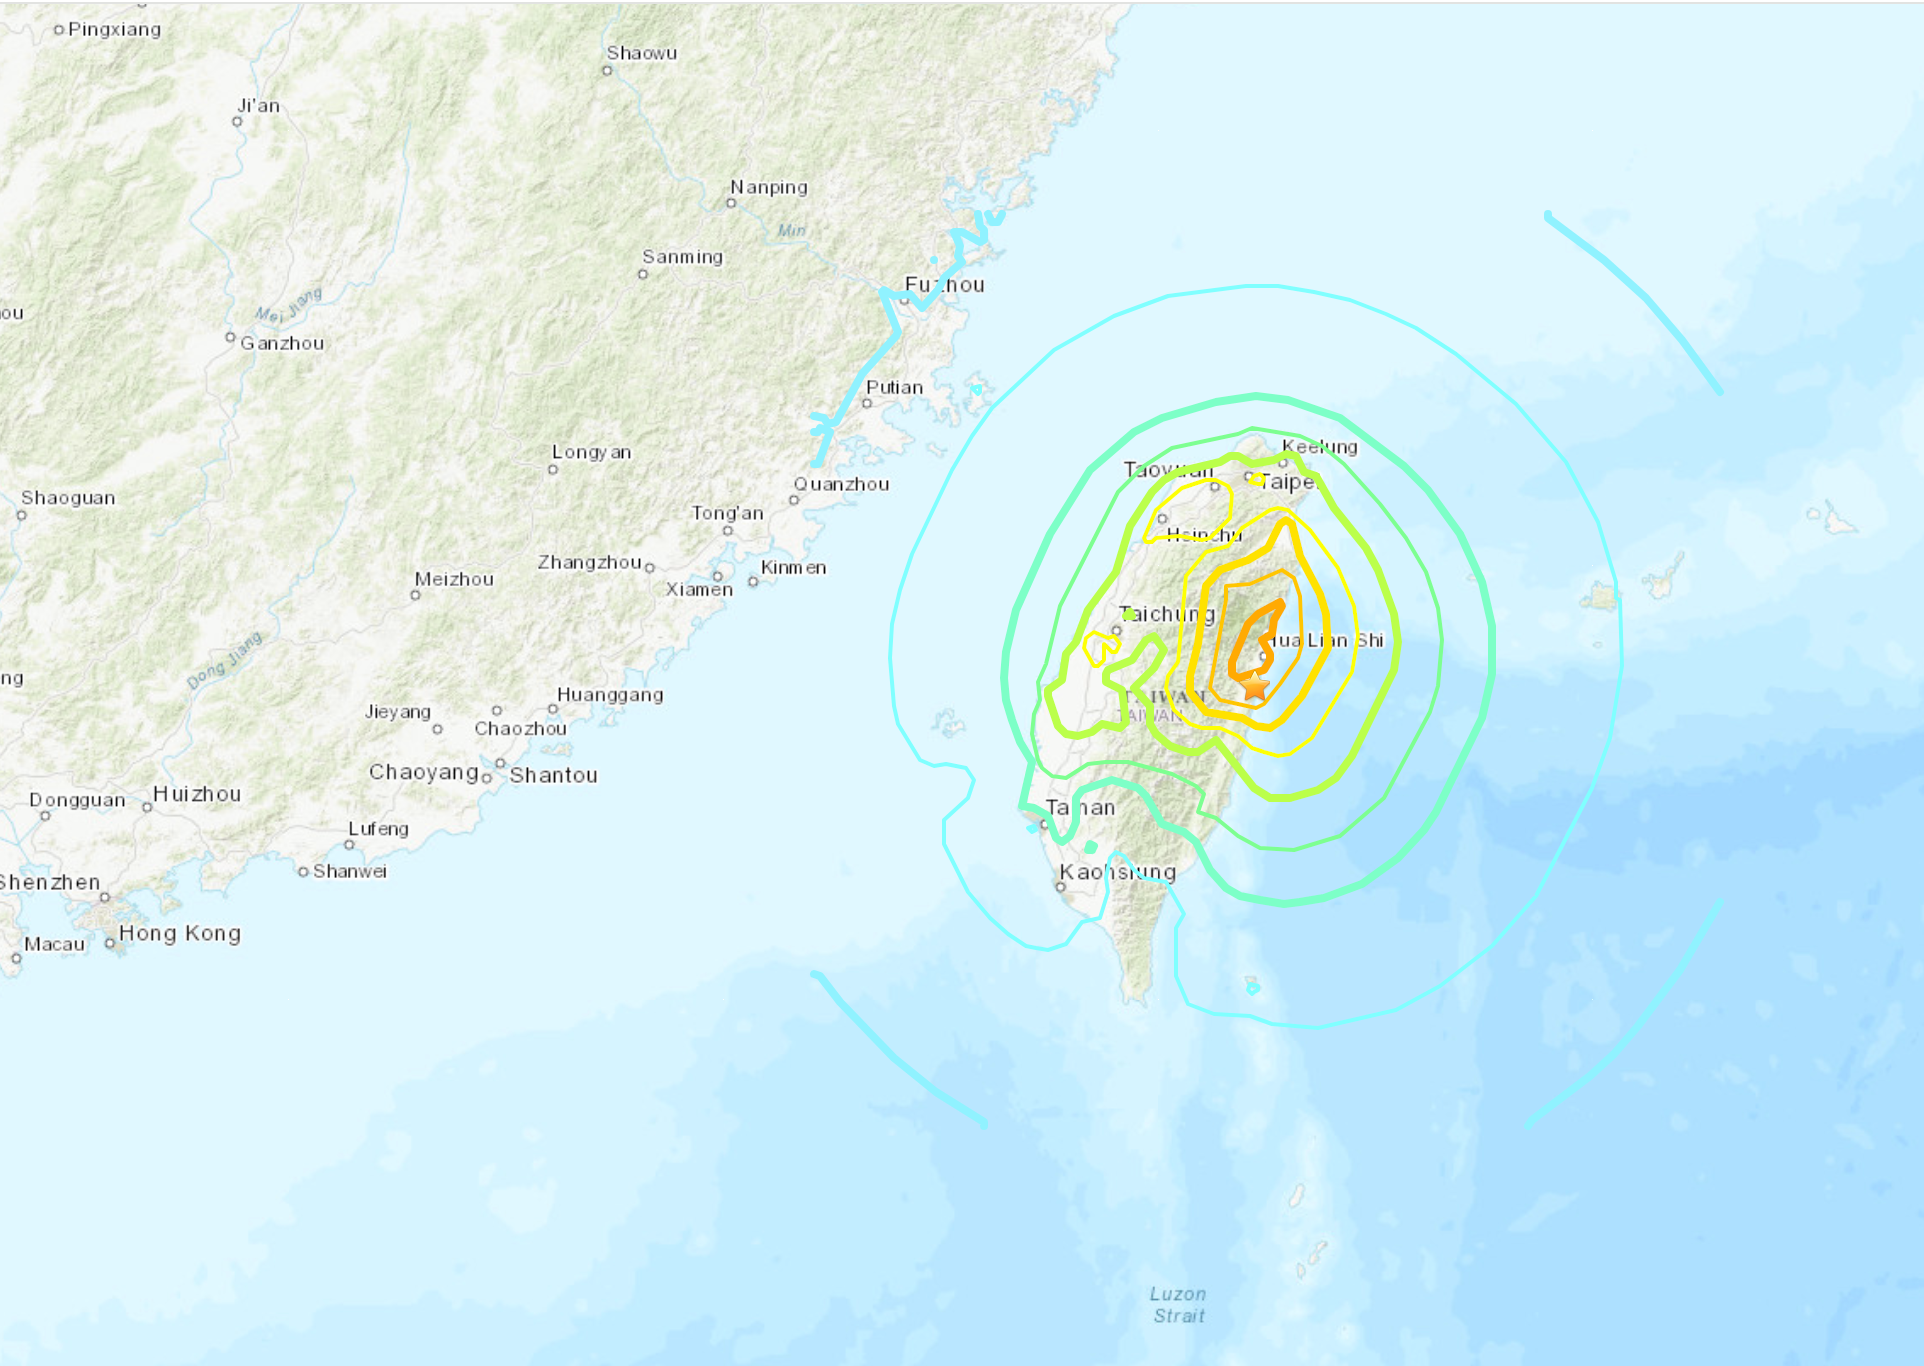 Map provided by the US Geological Survey shows how the earthquake was felt on mainland China, and strongly impacted the capital Taipei to the north of Taiwan island